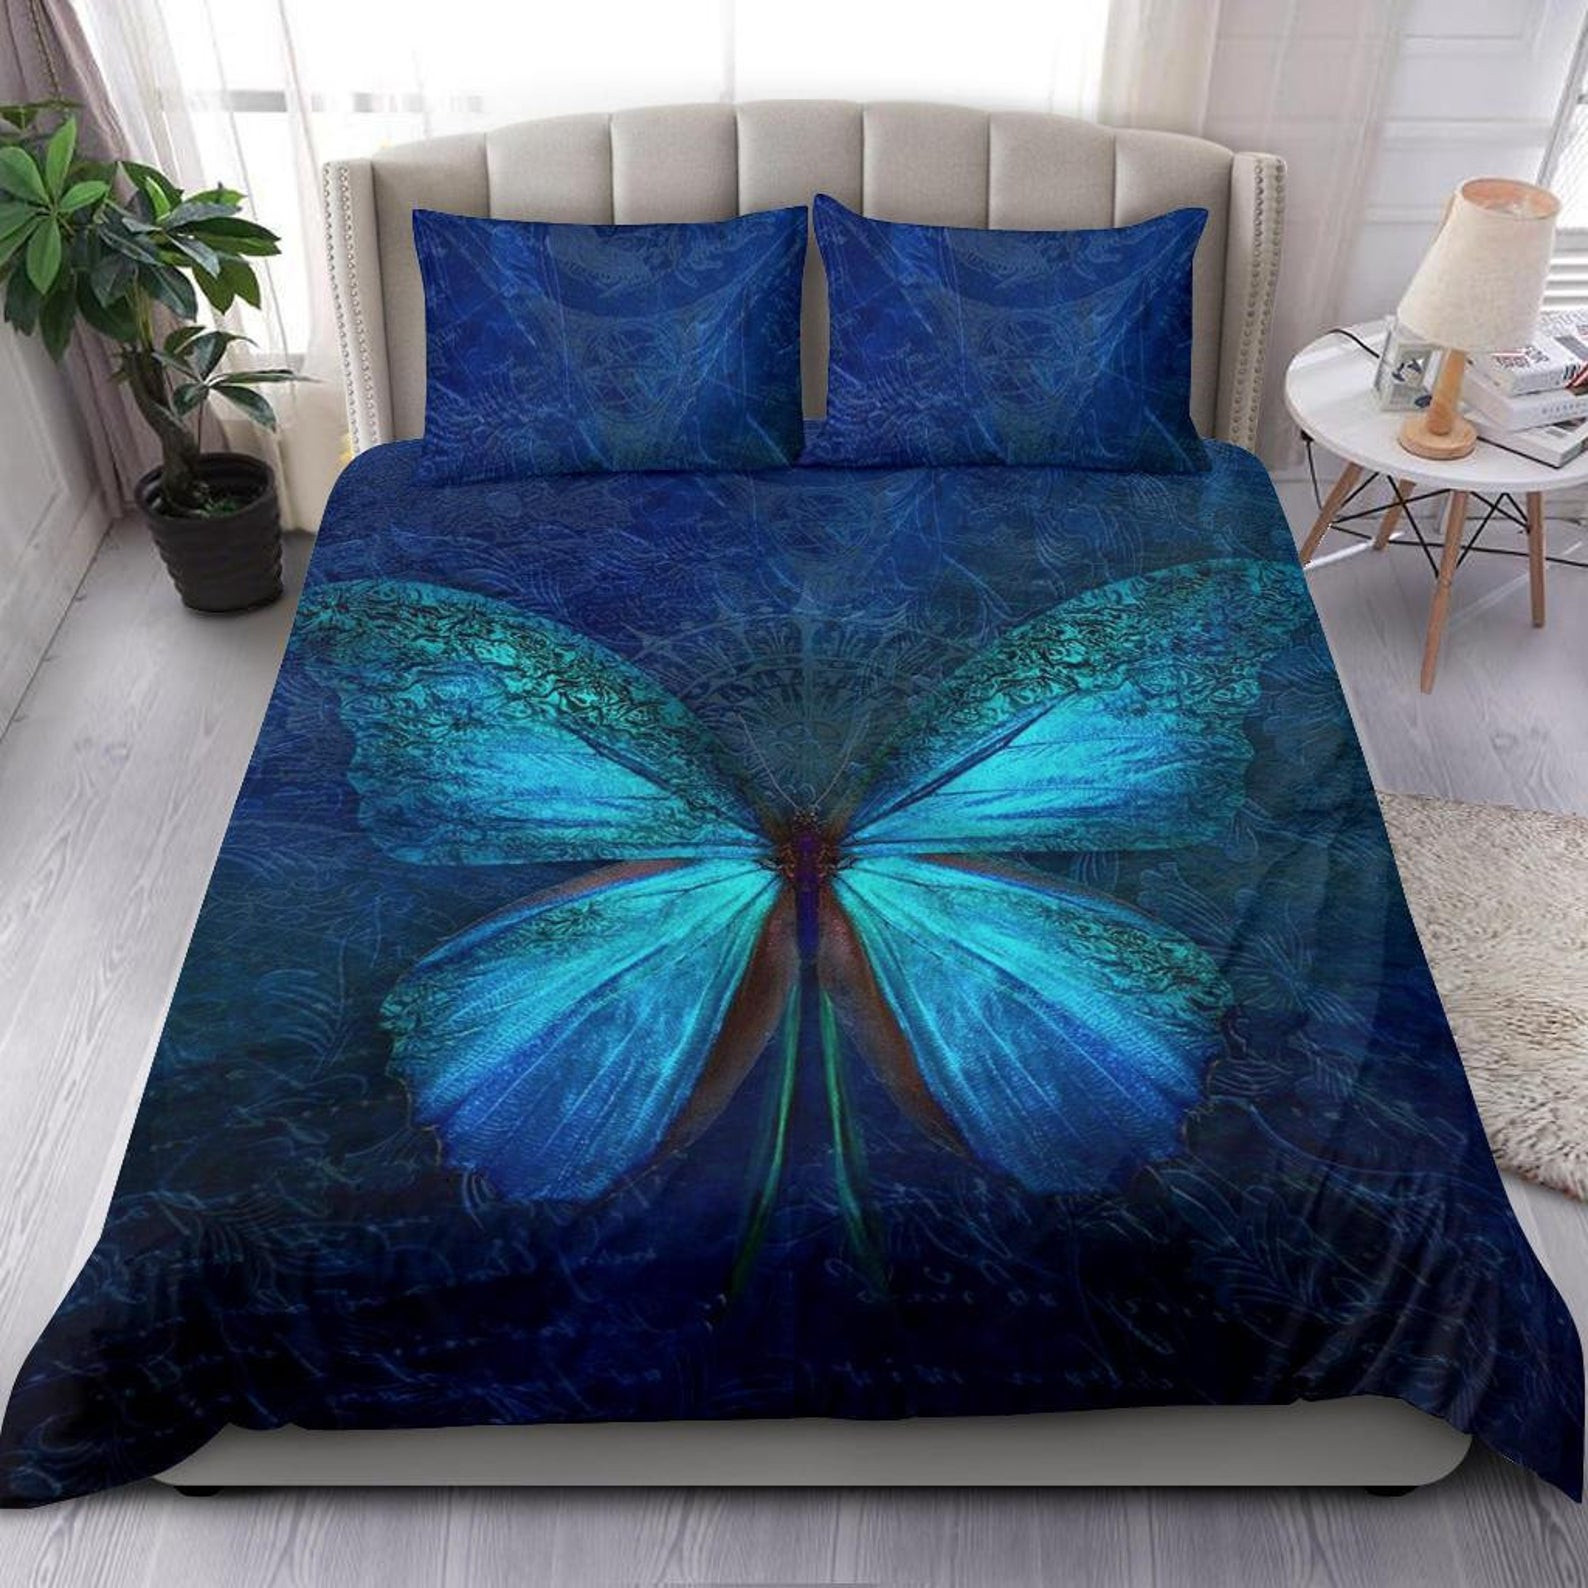 blue butterfly bed sheets duvet cover bedding sets 3frjn